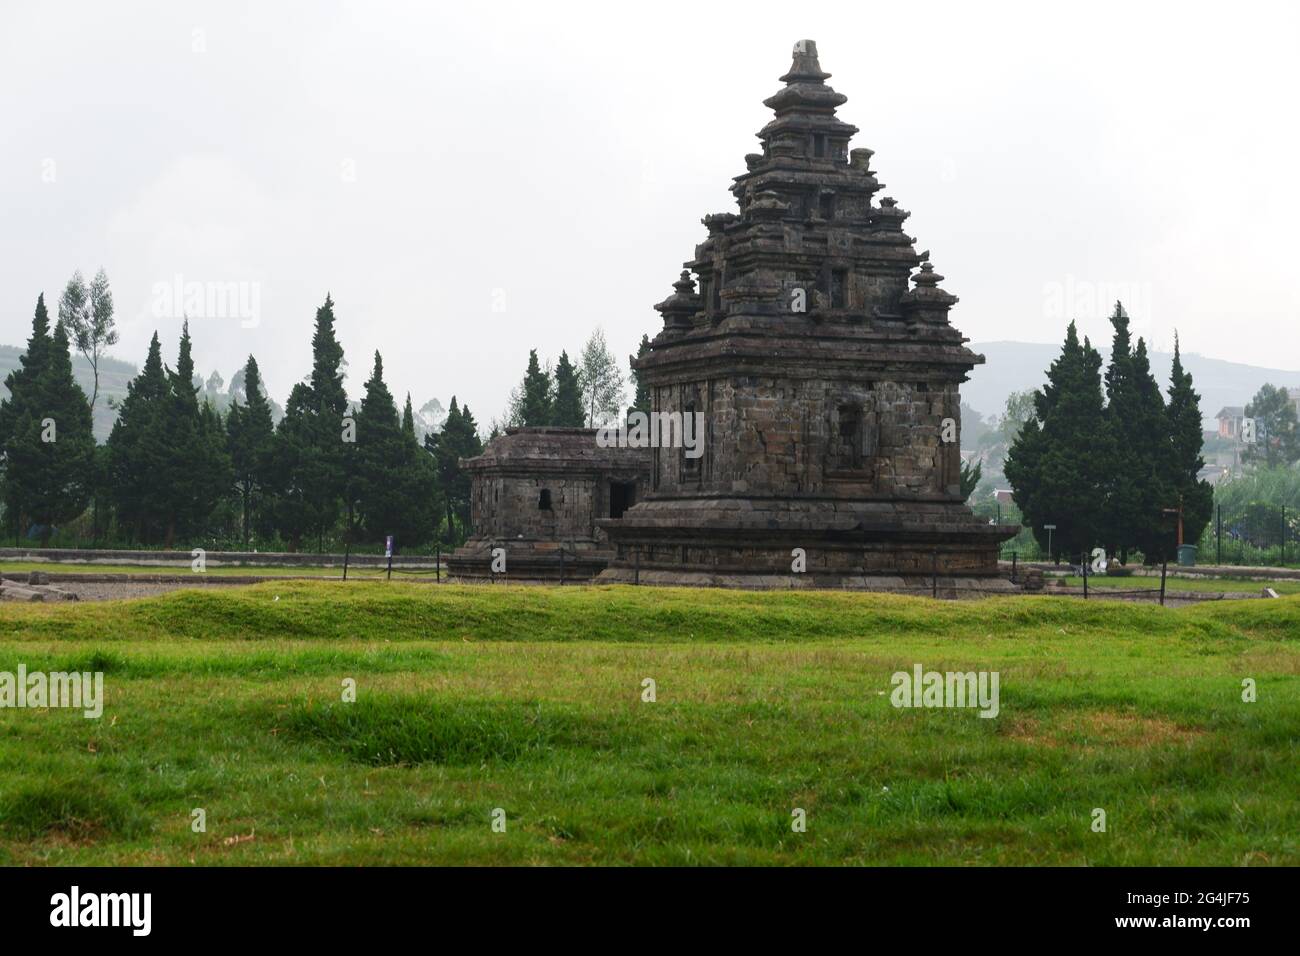 Beautiful view of the Arjuna temple in the Dieng temple compound, Indonesia Stock Photo